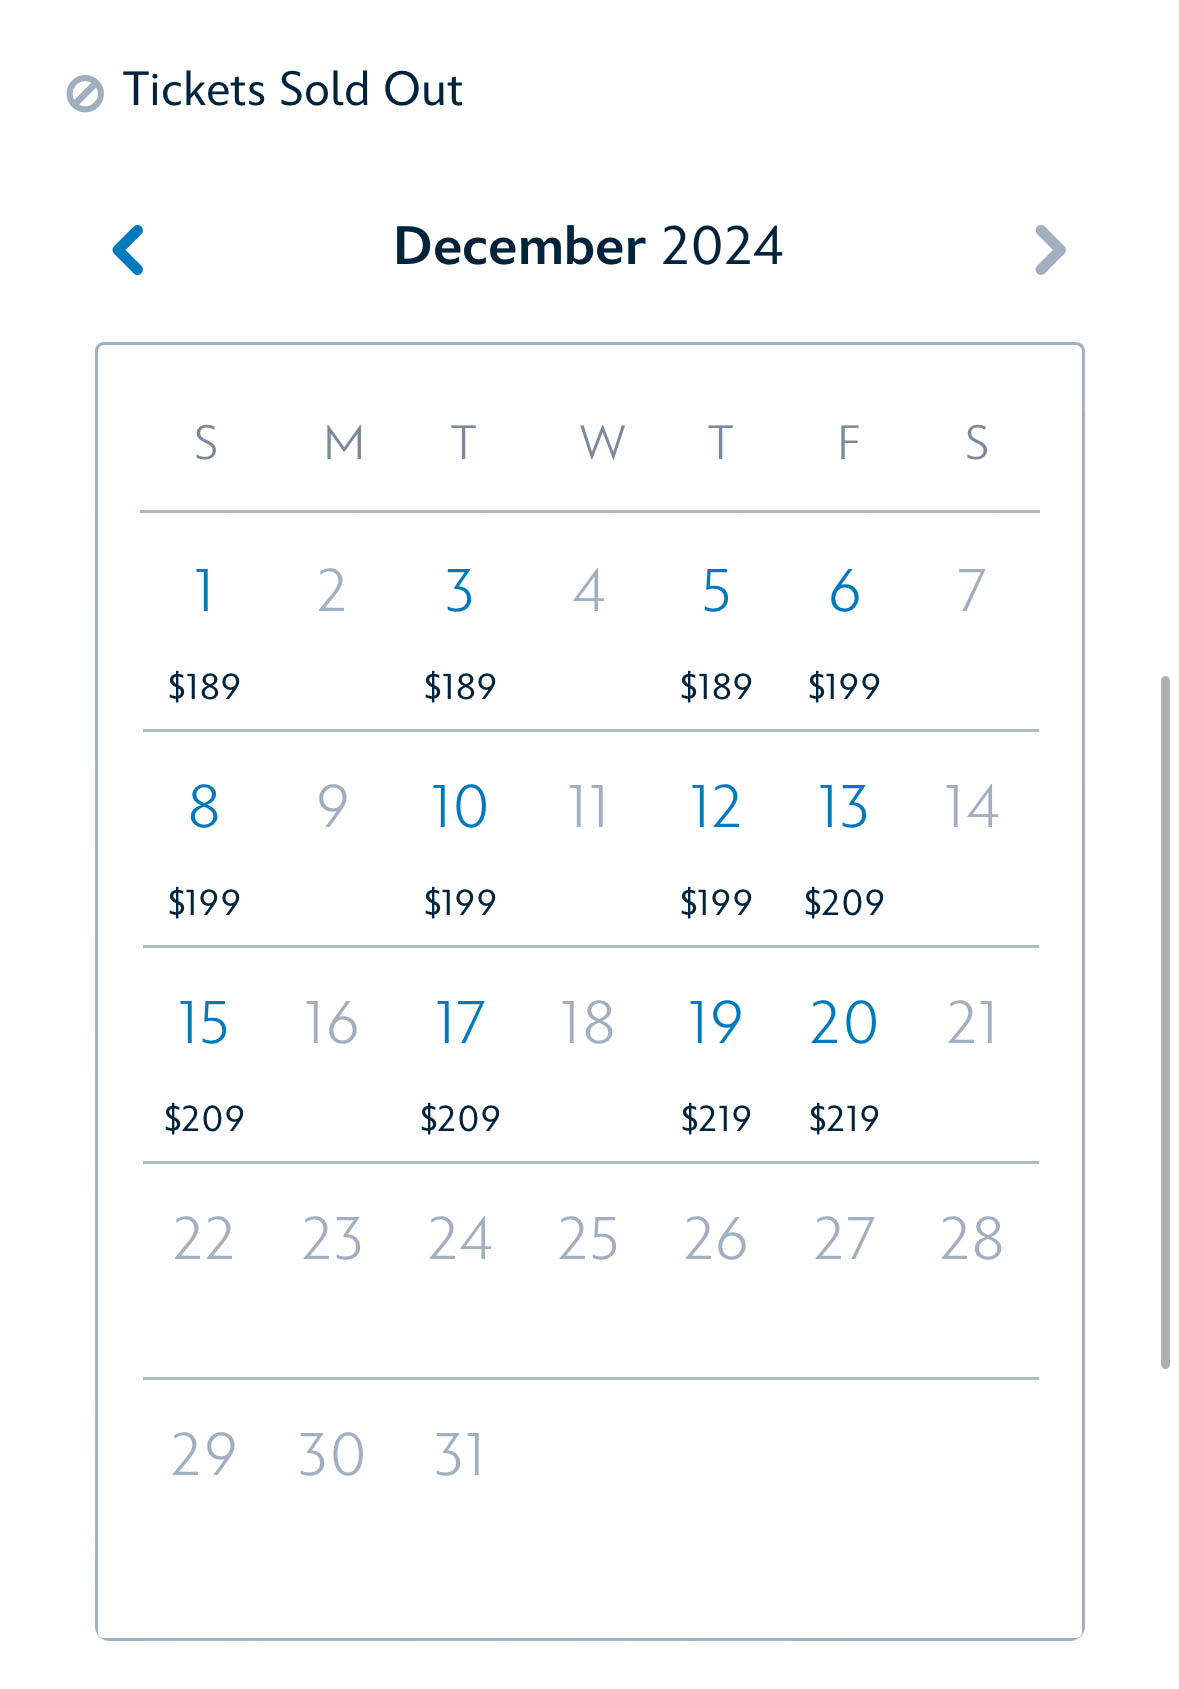 Mickey's Very Merry Christmas Party pricing